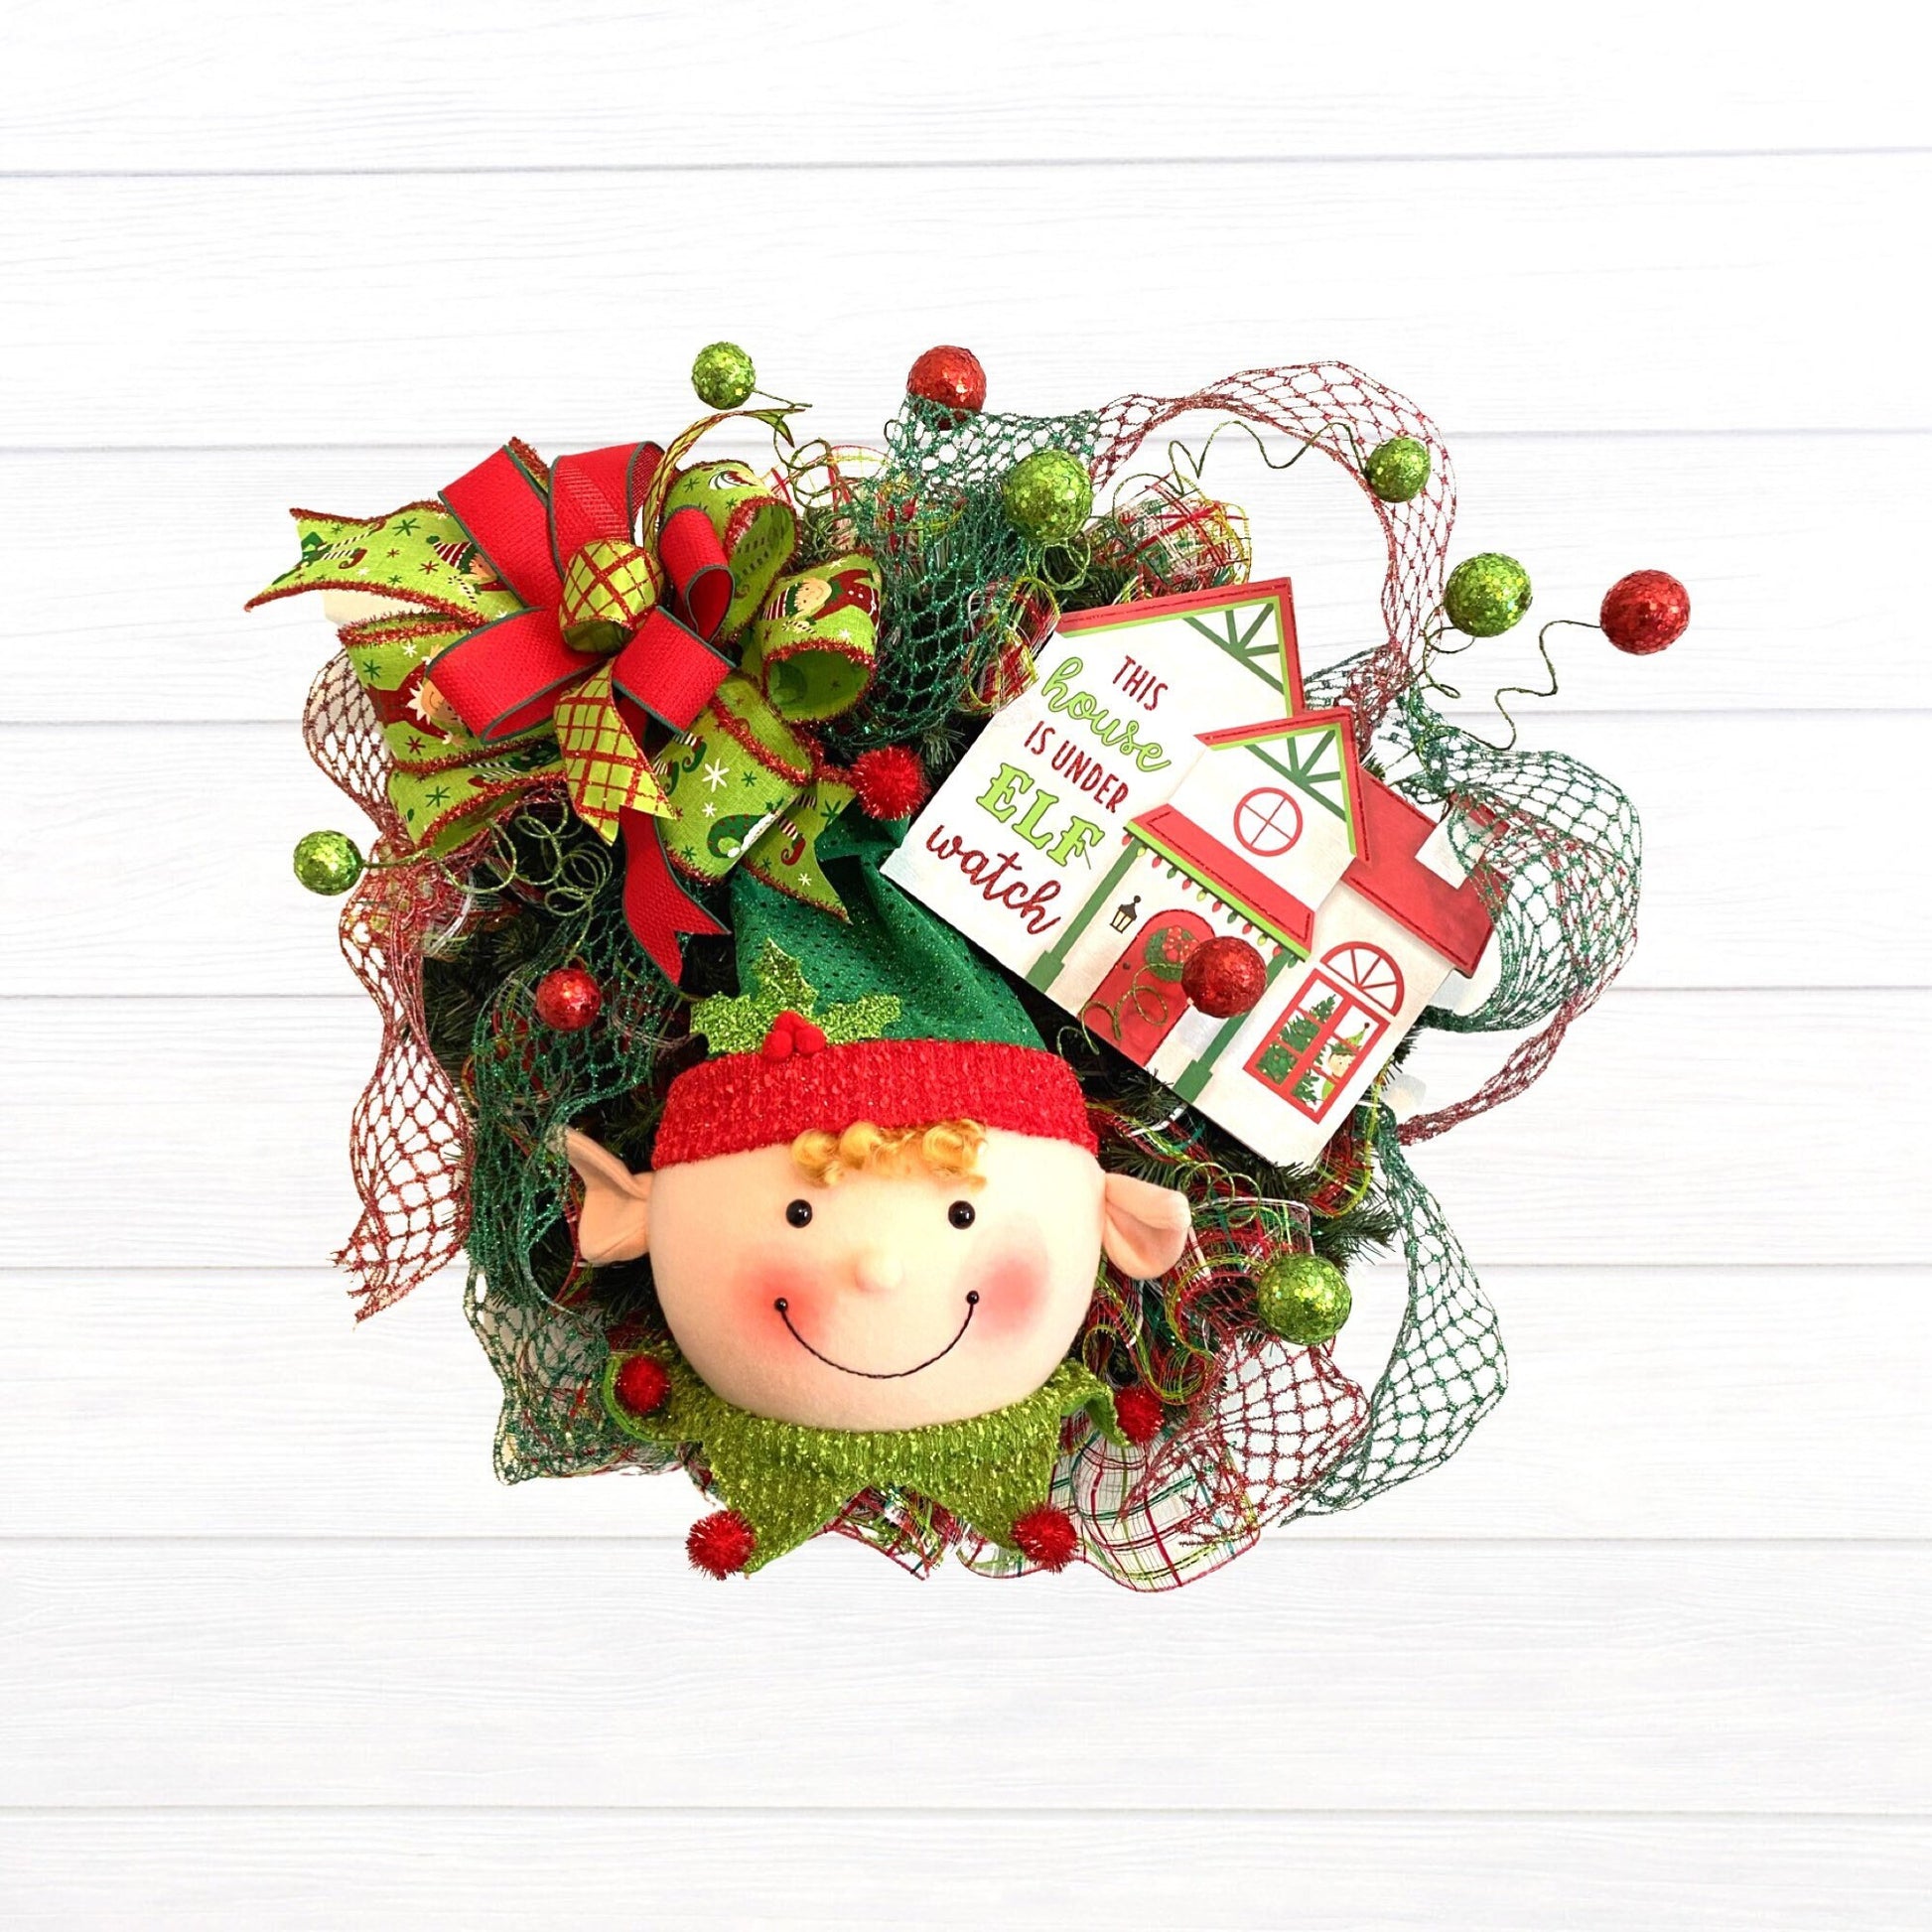 Christmas Elf Wreath for Front Door, House Is Under Elf Watch Wreath, Whimsical North Pole Elf Holiday Decoration, Christmas Wall Decor